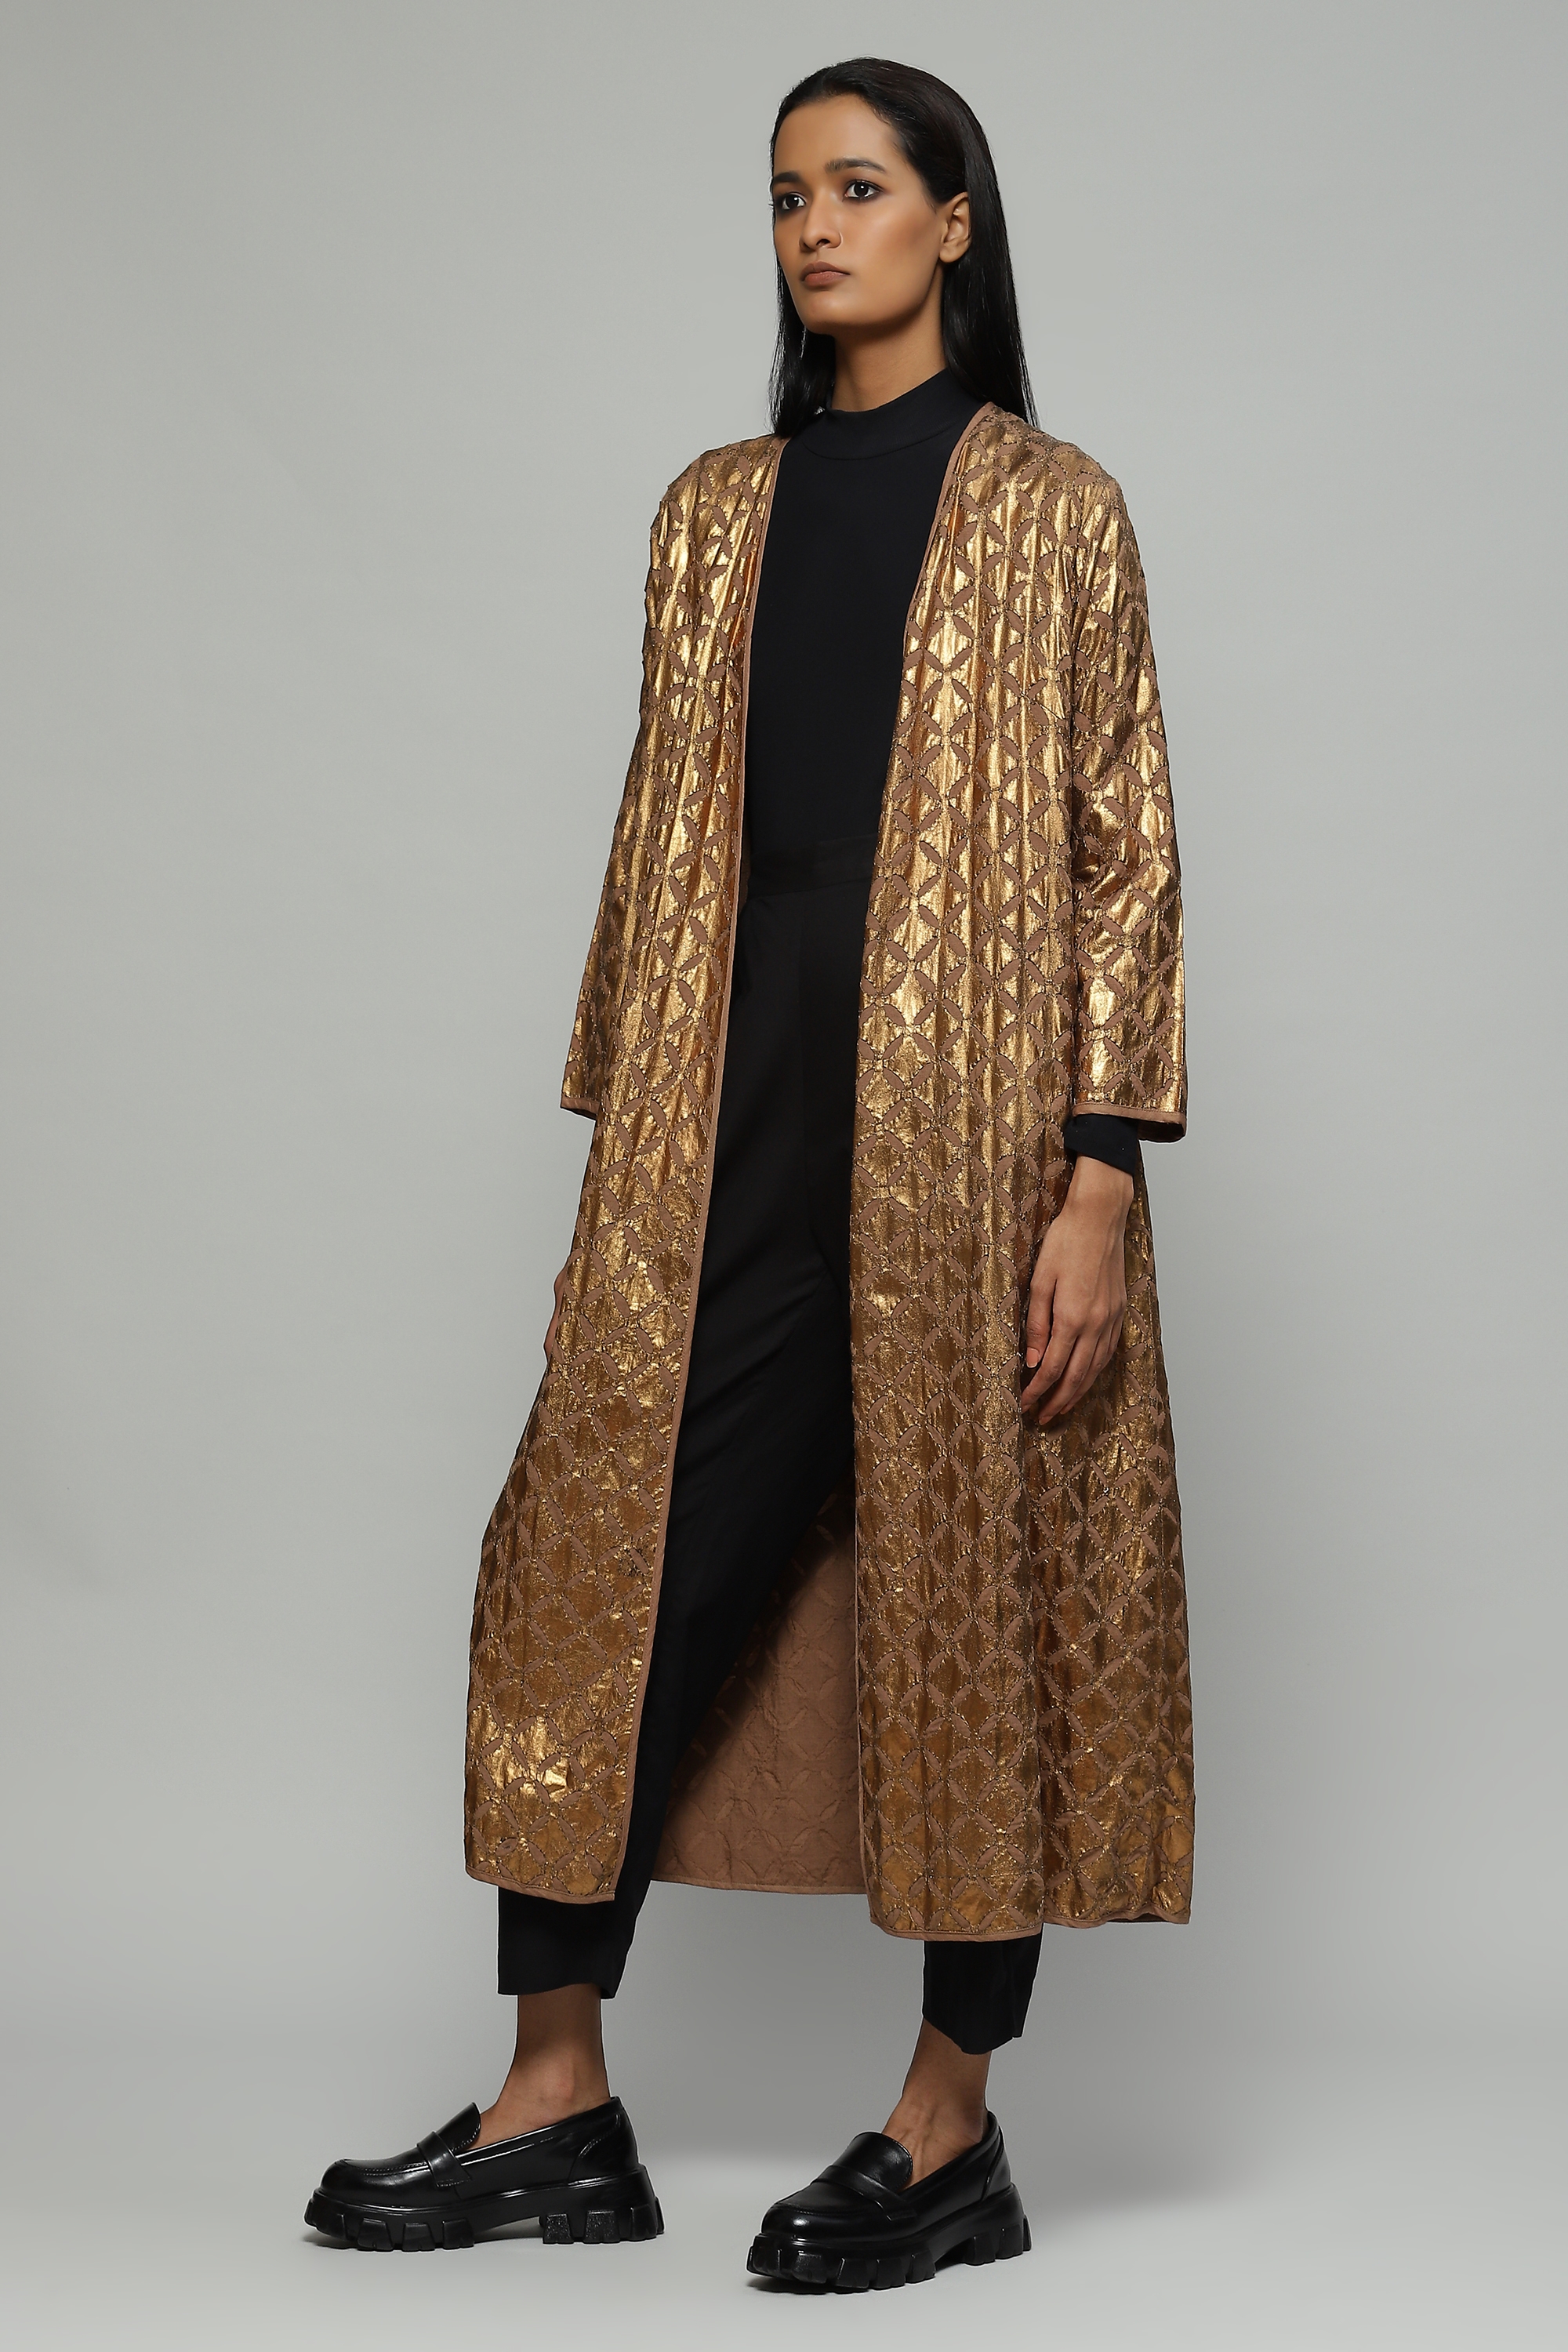 ABRAHAM AND THAKORE | Foil Applique And Cutwork Jacket